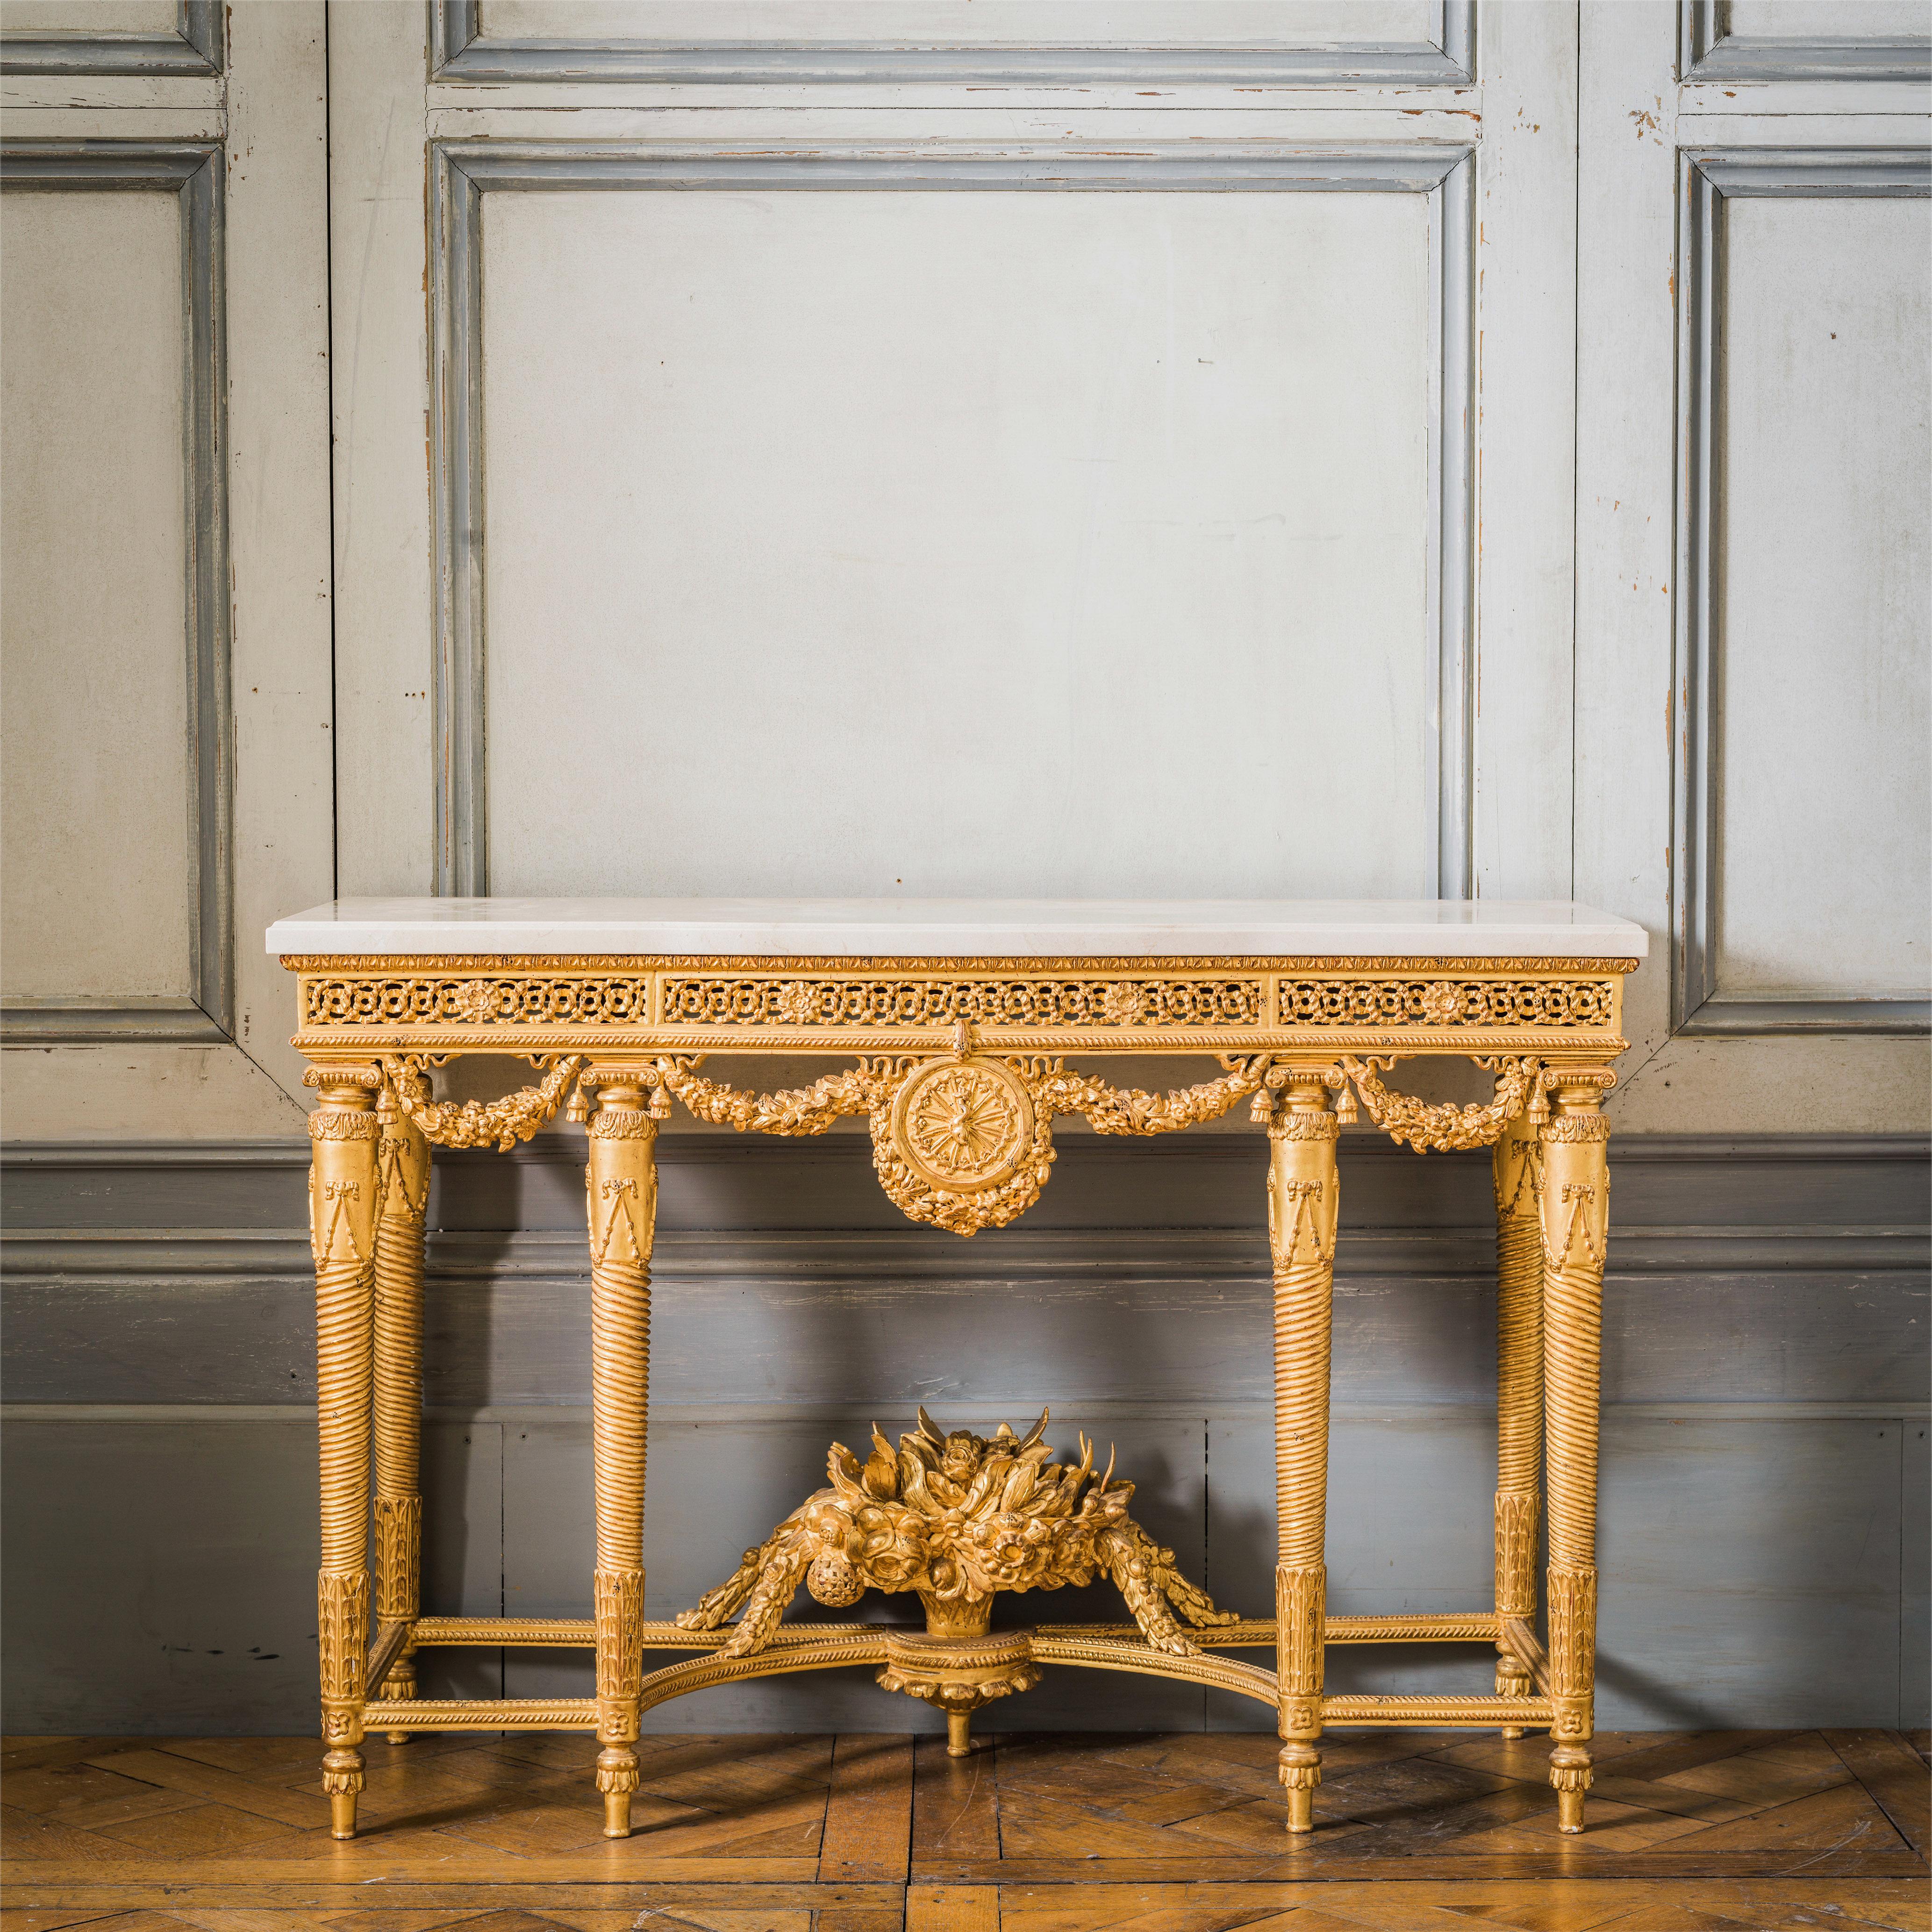 Louis XVI style giltwood consoles: Made by master craftsmen, elegantly carved and hand finished in a water gilded patina of 23.75-karat gold leaf. With 30mm Crema Marfil Beveled marble tops.
We have 2 in Stock if needed.